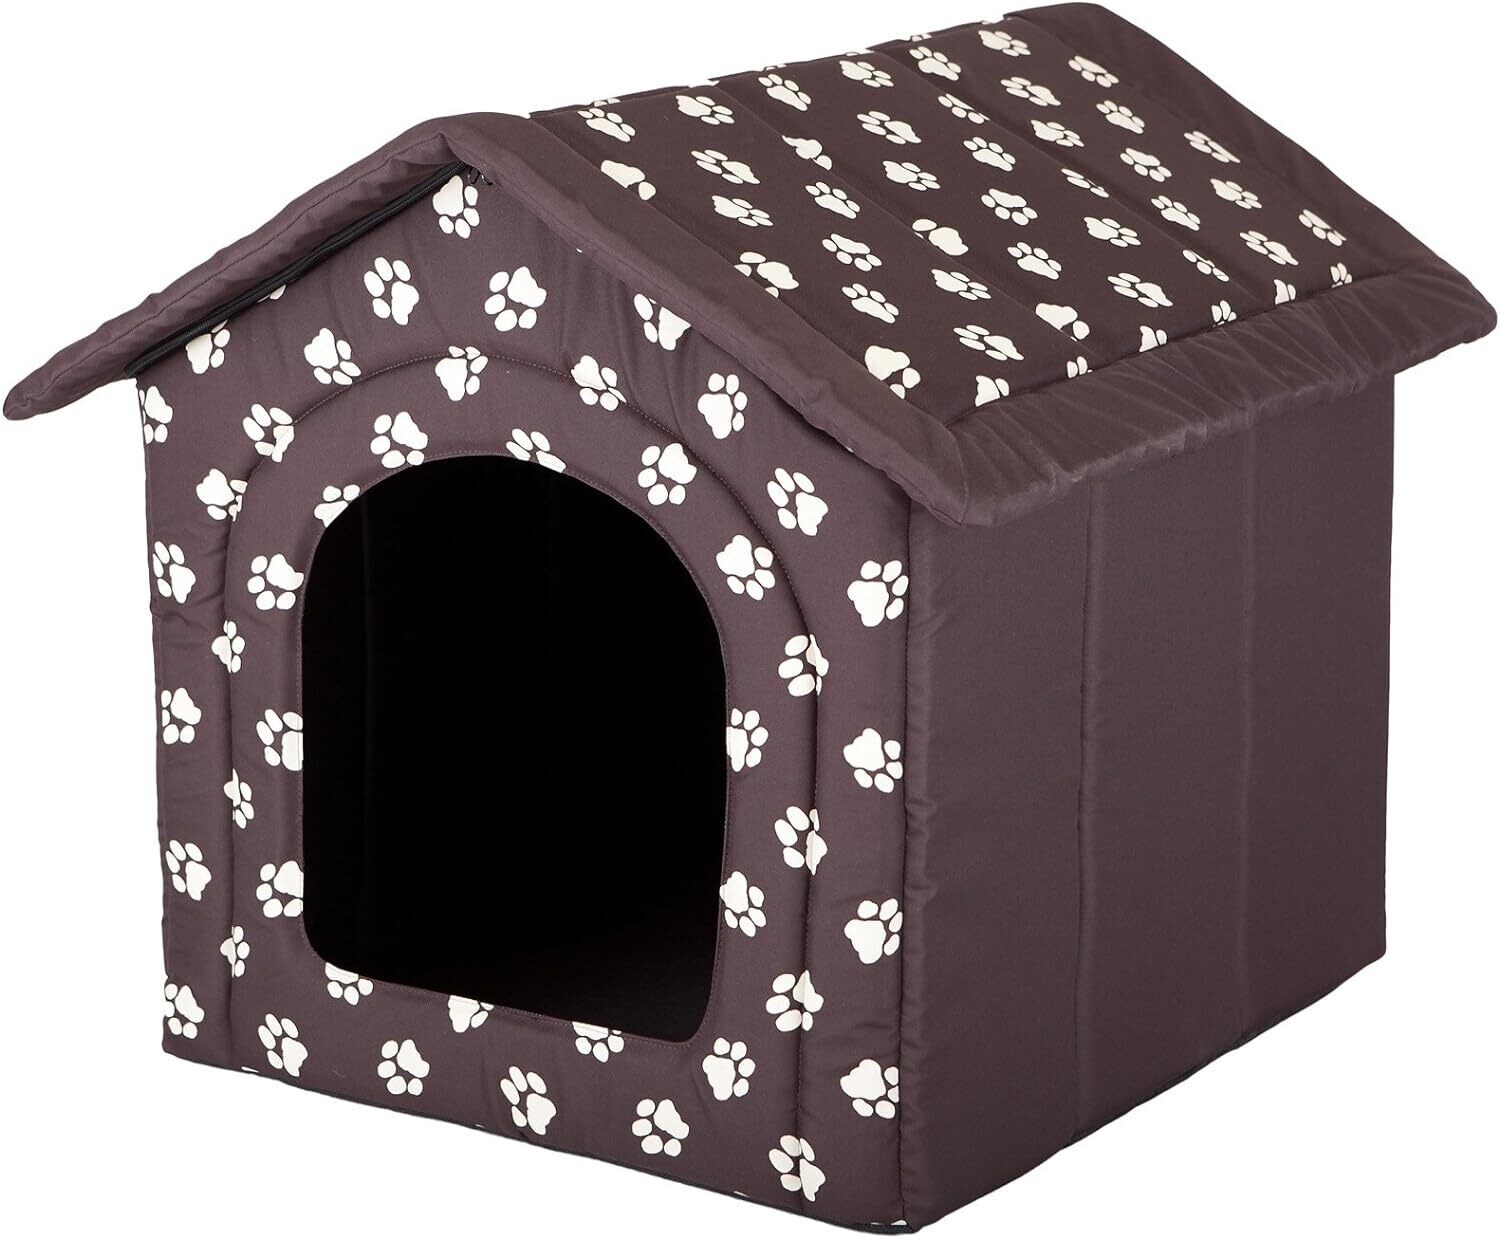 Waterproof Dog House Hut with Paws Removable Roof Size of Dog Kennel: 4 Strong Cordura Fabric, 60x55 cm, EU Product; Machine Washable 30°C; Scratch-Resistant